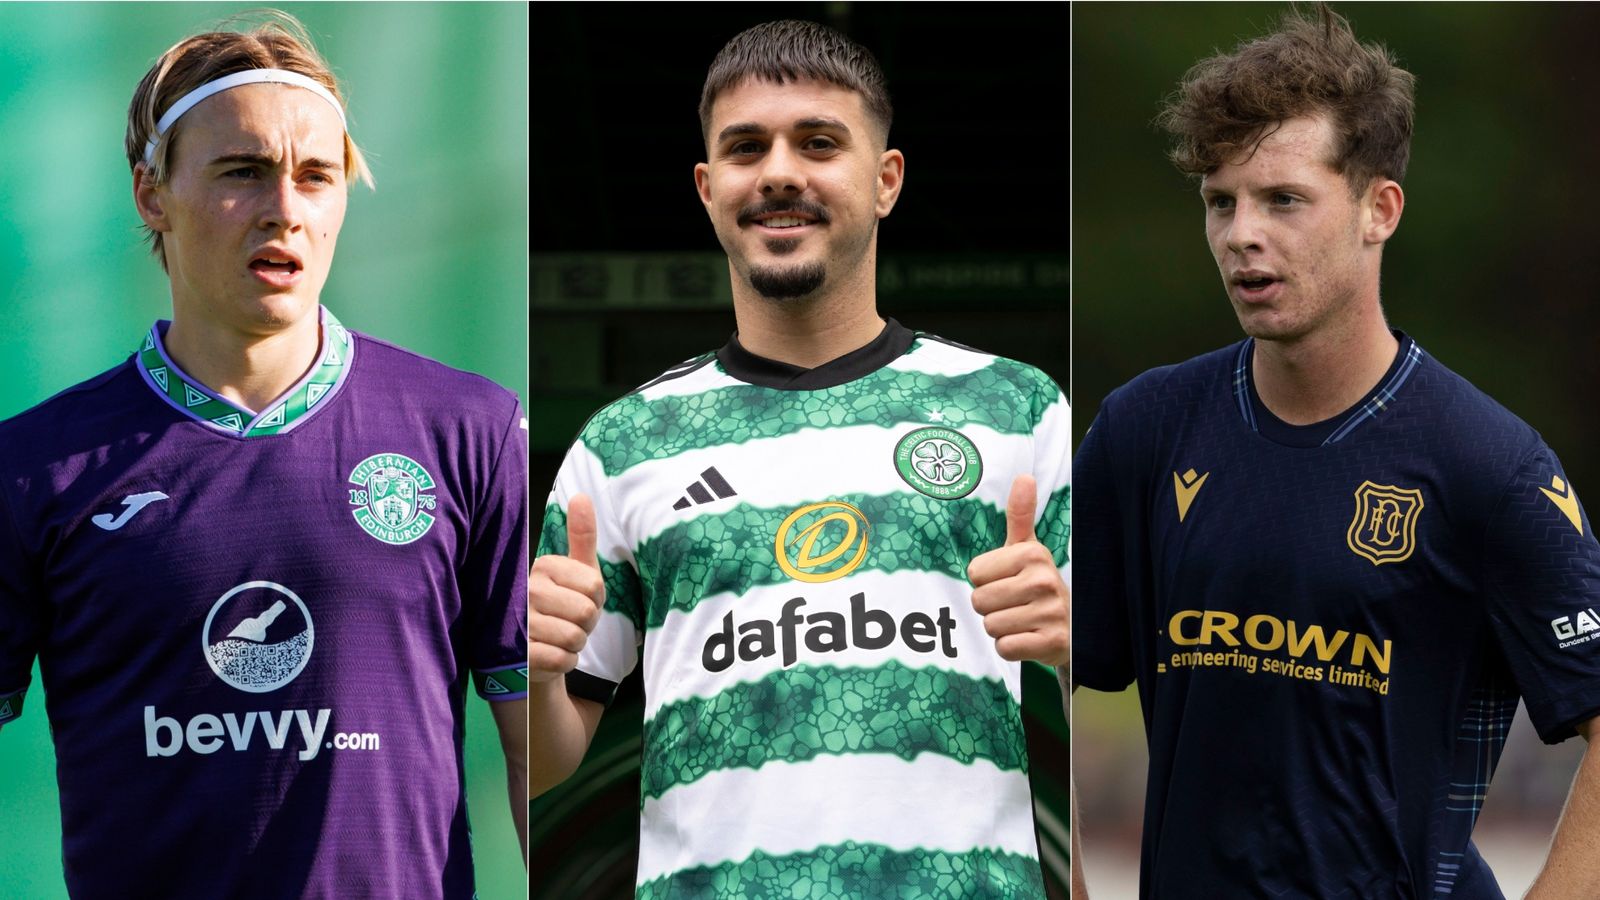 Celtic fans react to 'appalling' third kit as club unveil bold new pink  strip - Football Scotland